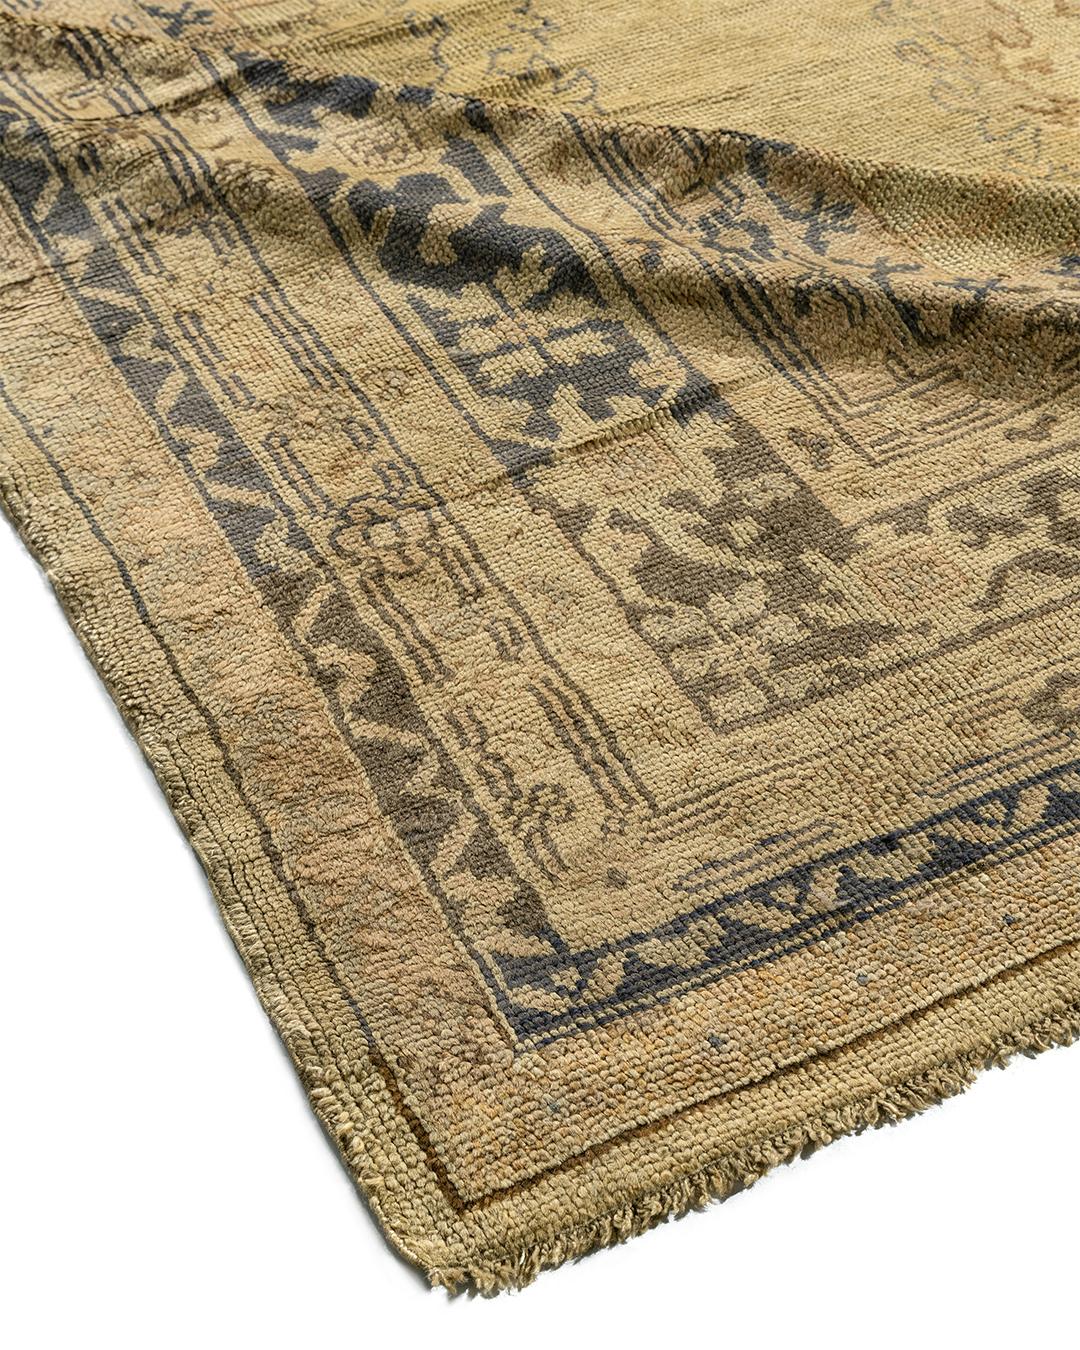 Antique Oushaks are known for their soft palettes combined with eccentric drawing. The relatively coarse weaves, here on a wool foundation, mean vinery and branches are bent and broken rather than flowing smoothly, and individual motives develop